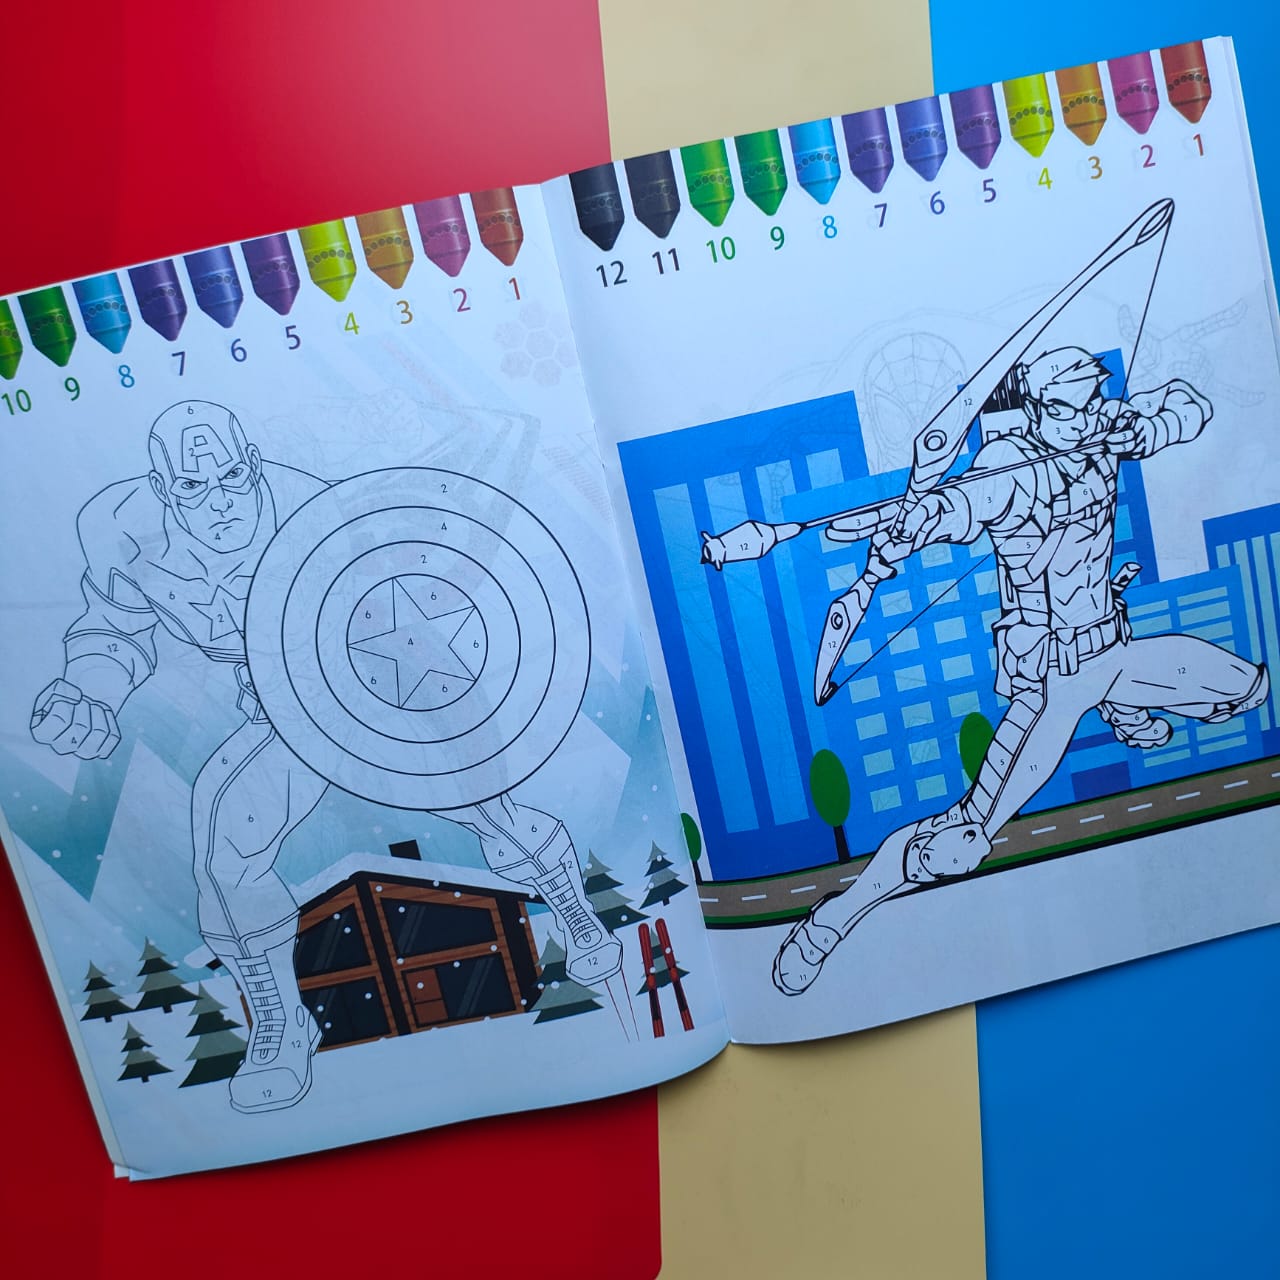 Avengers Colouring Book With Stickers(Random Characters